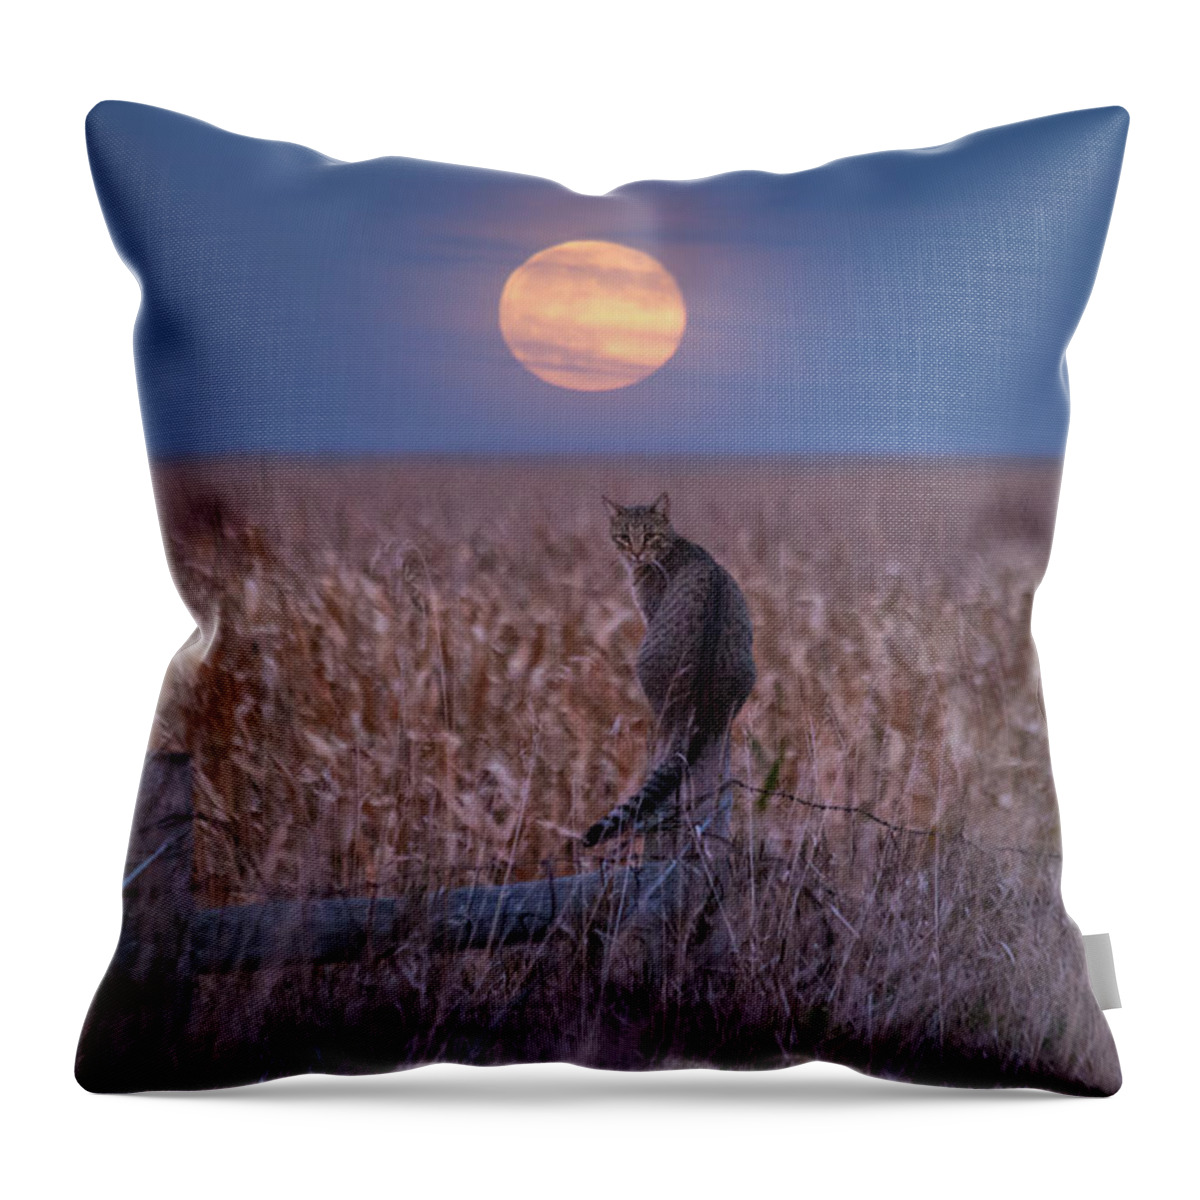 Moon Throw Pillow featuring the photograph Moon Kitty by Aaron J Groen